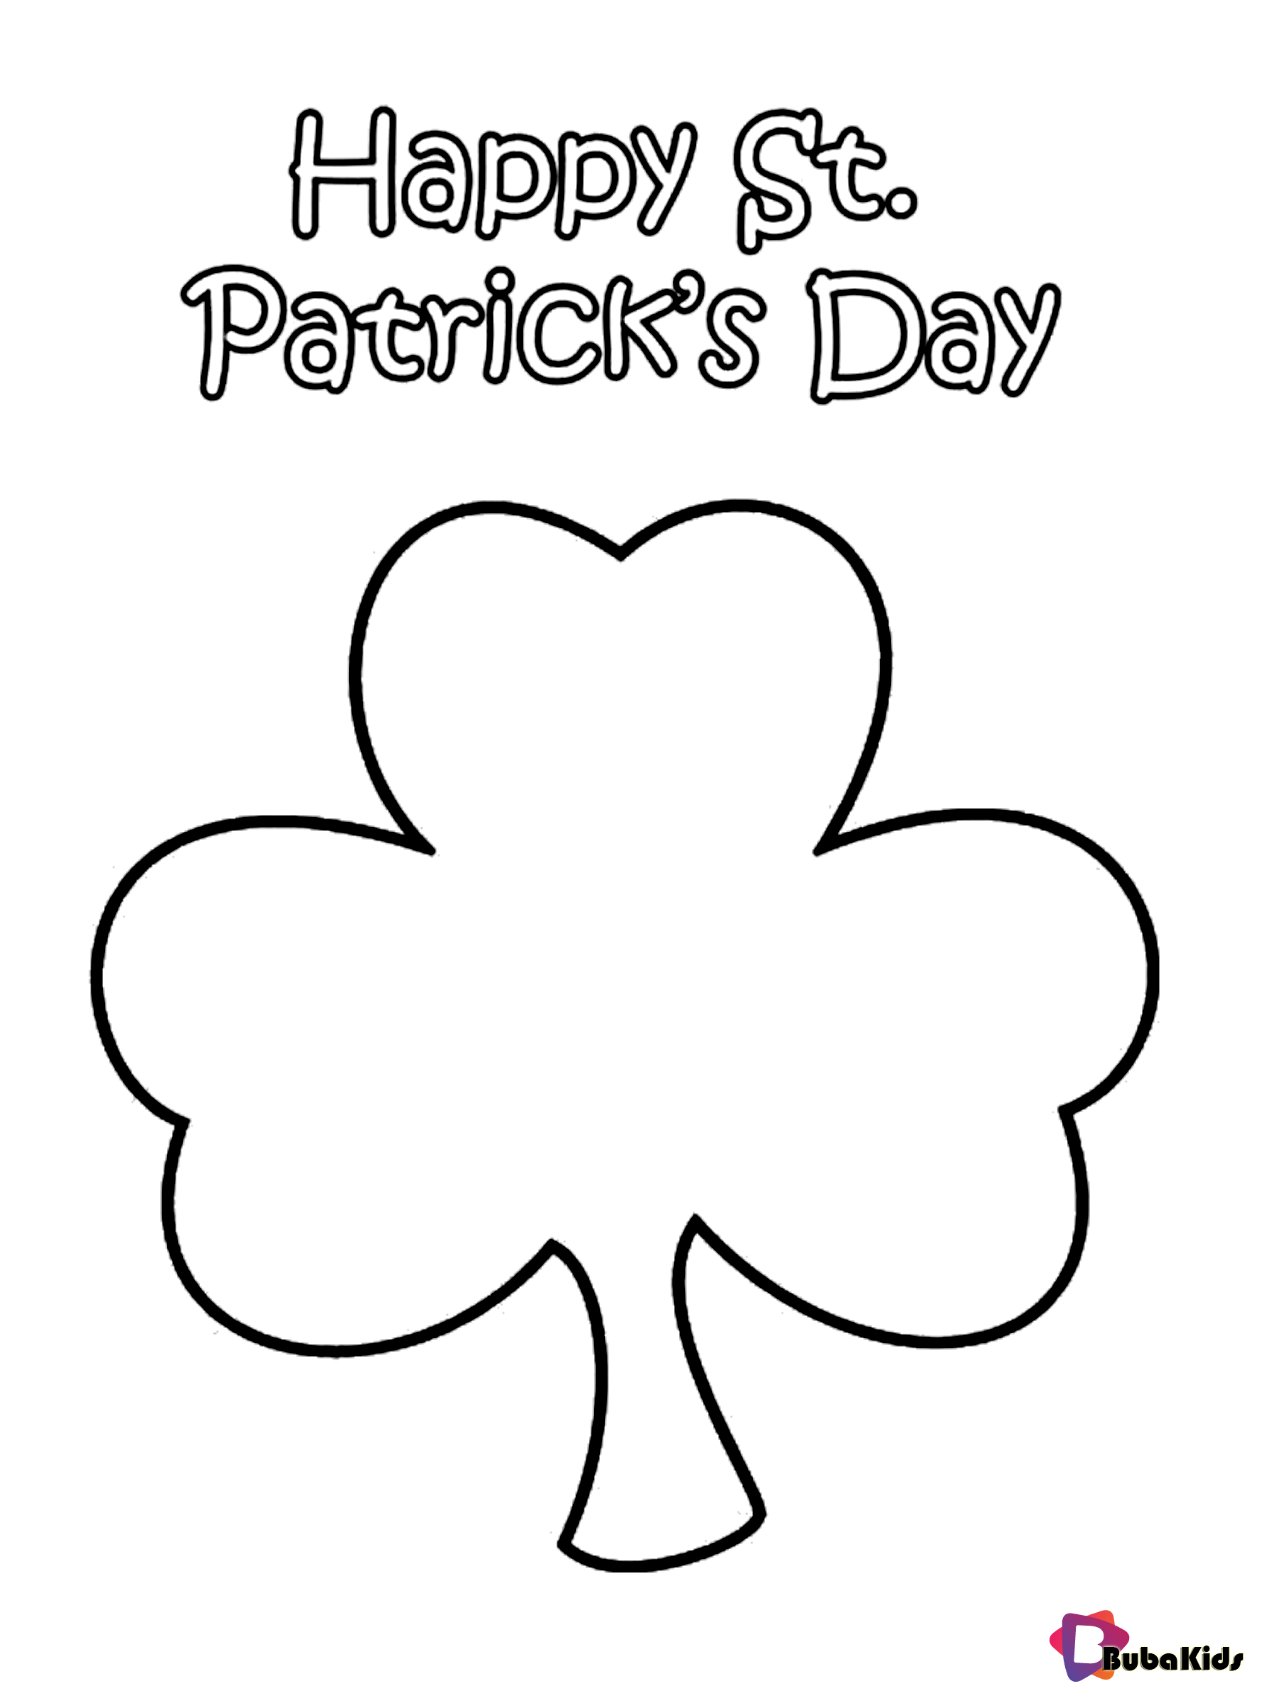 Happy st patricks day coloring page for kids Wallpaper